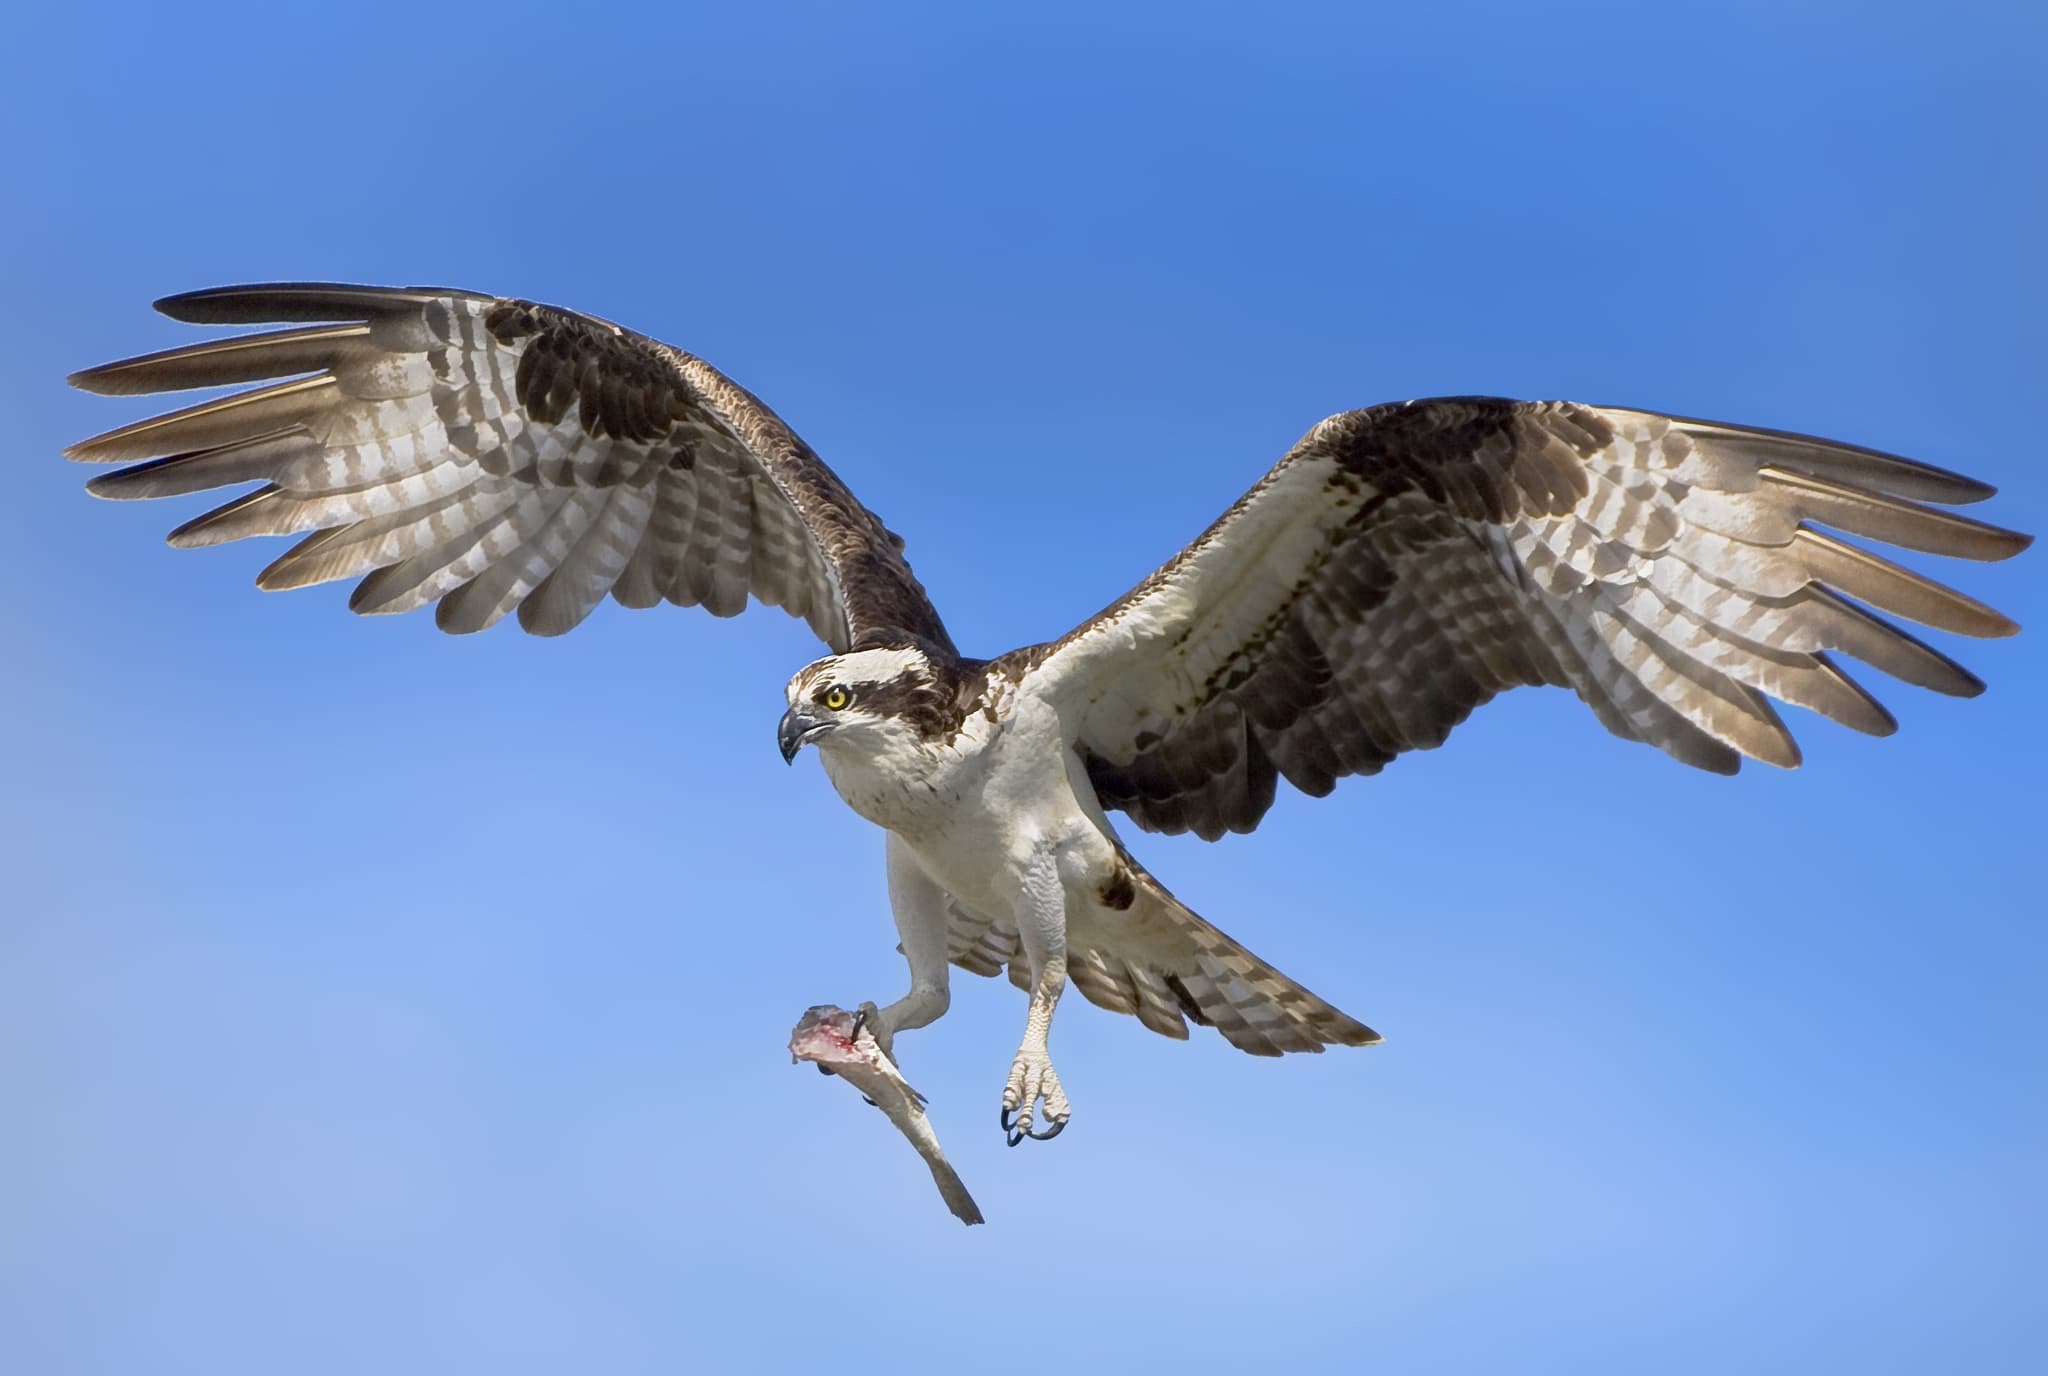 An image typical of those we hope you will capture during the Ospreys & other Birdlife of Florida photography holiday